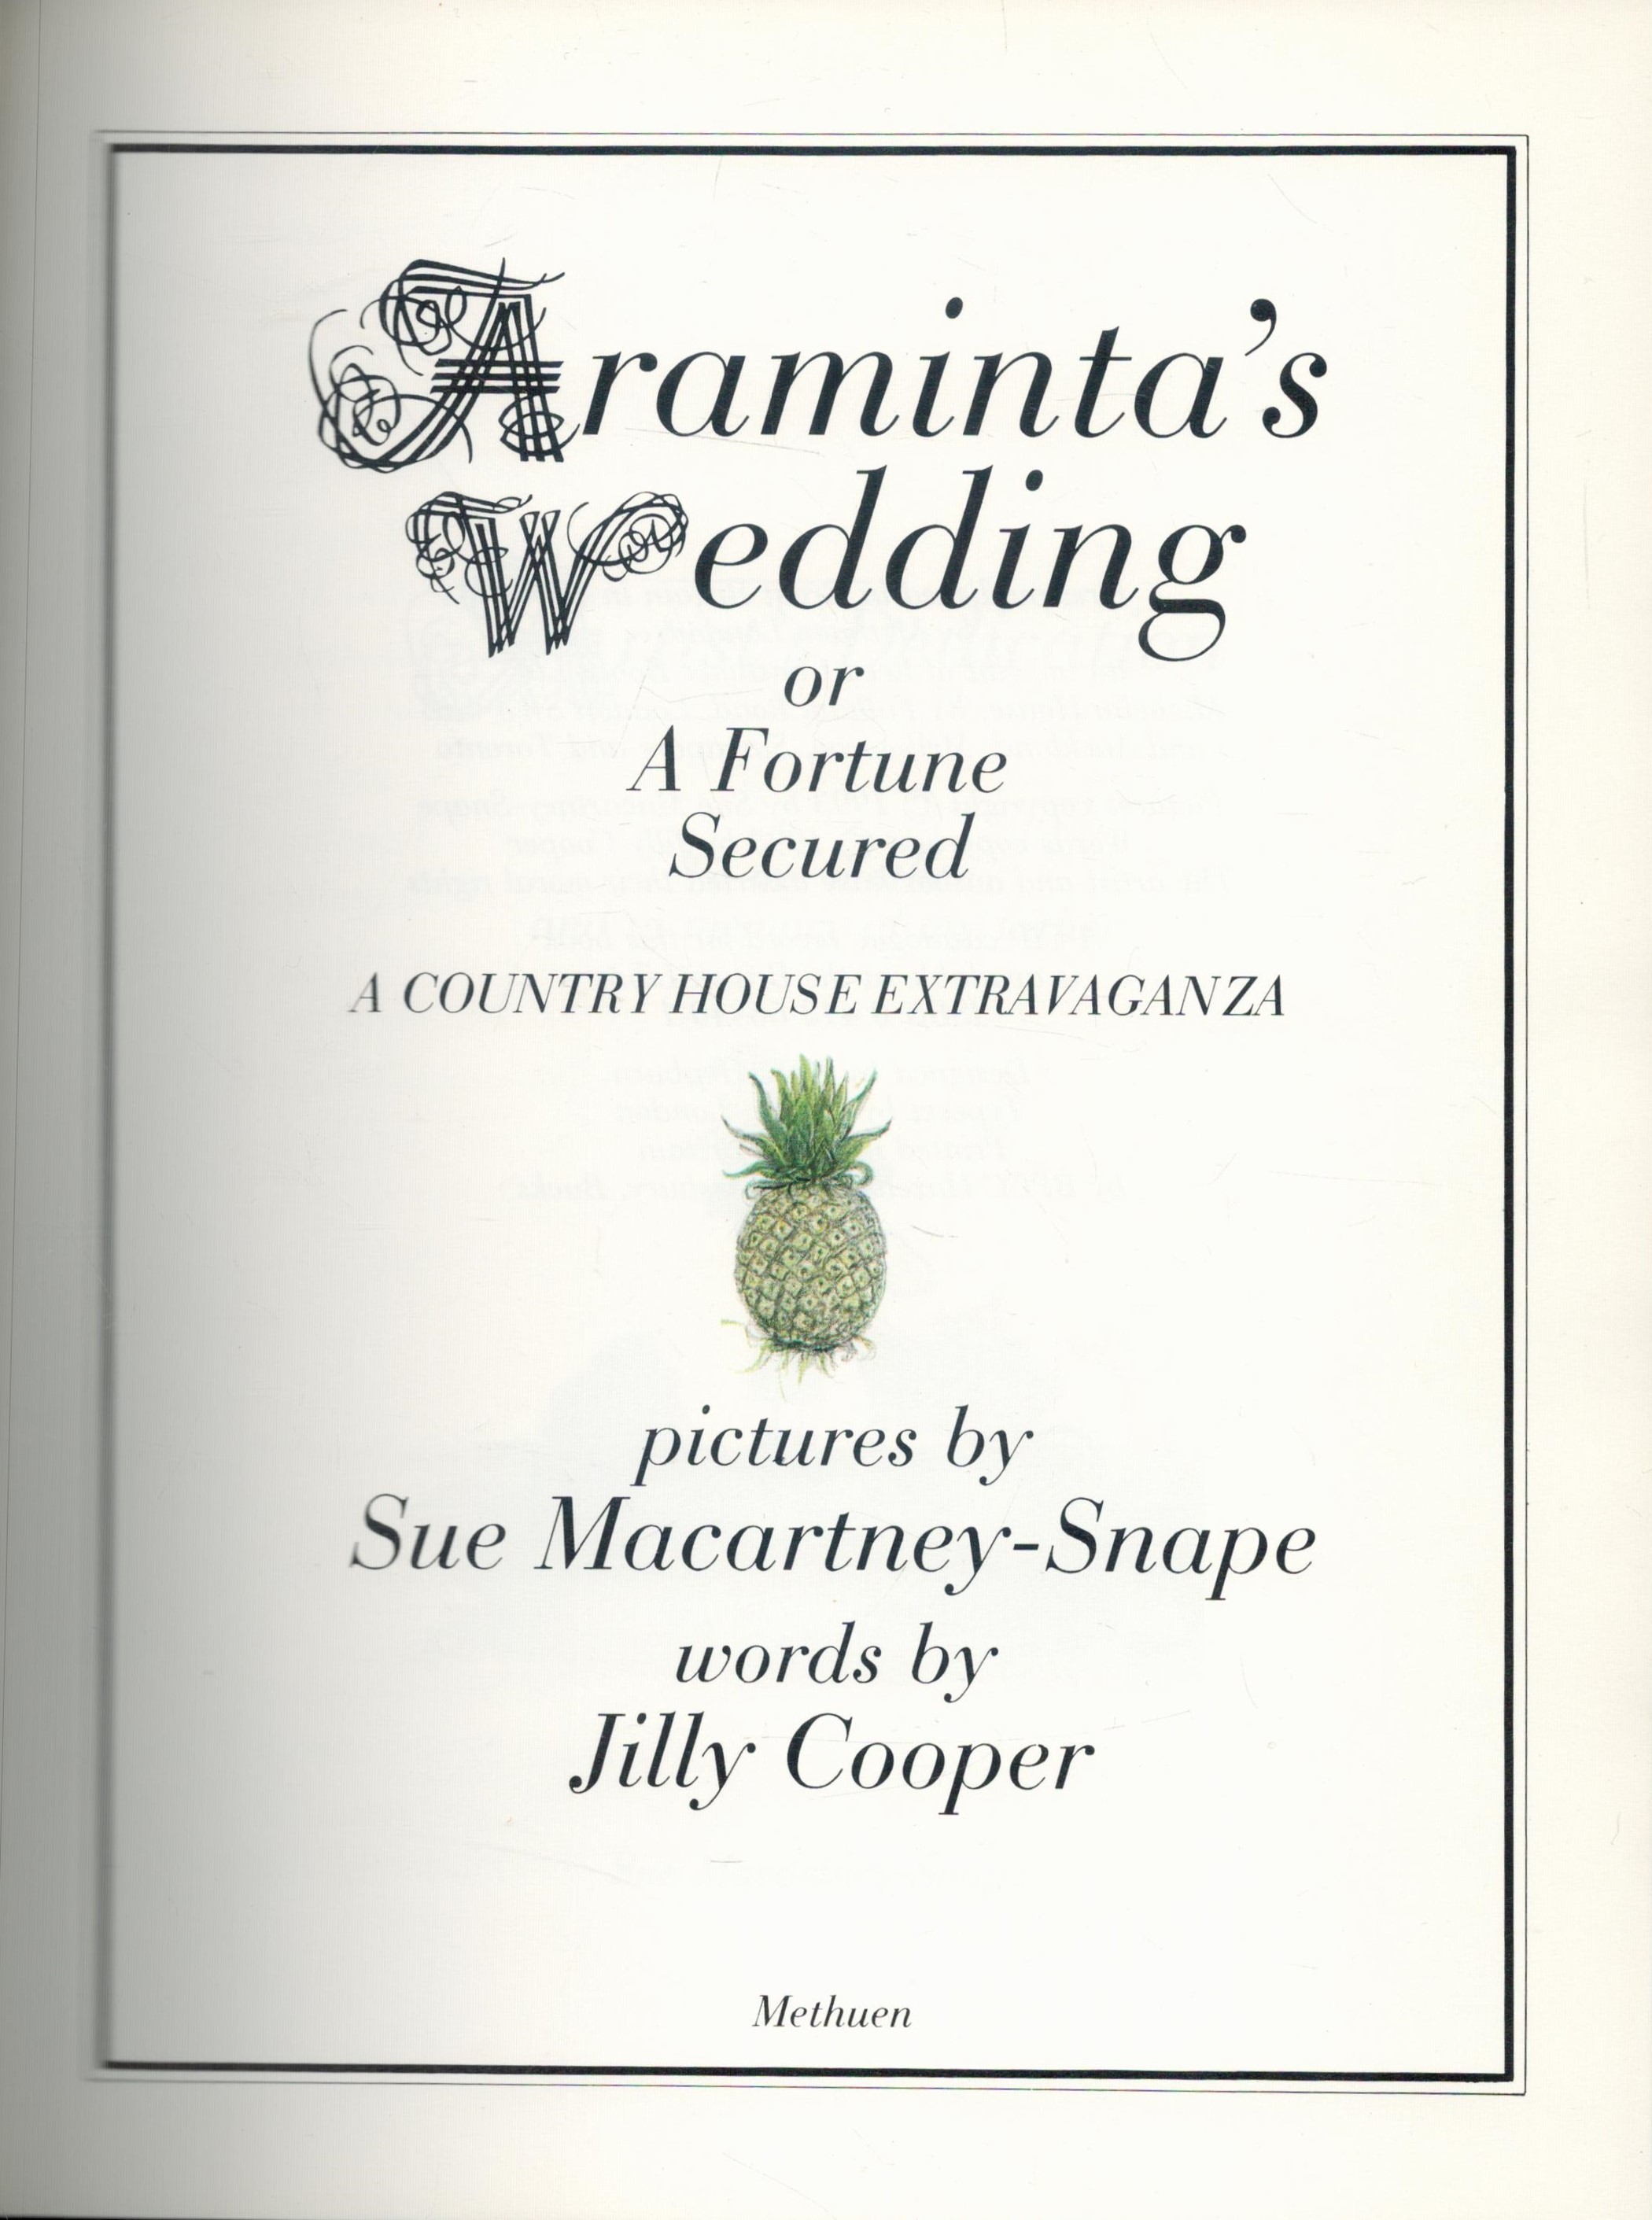 Araminta's Wedding or Fortune Secured - A Country House Extravaganza by Jilly Cooper 1993 First - Image 2 of 3